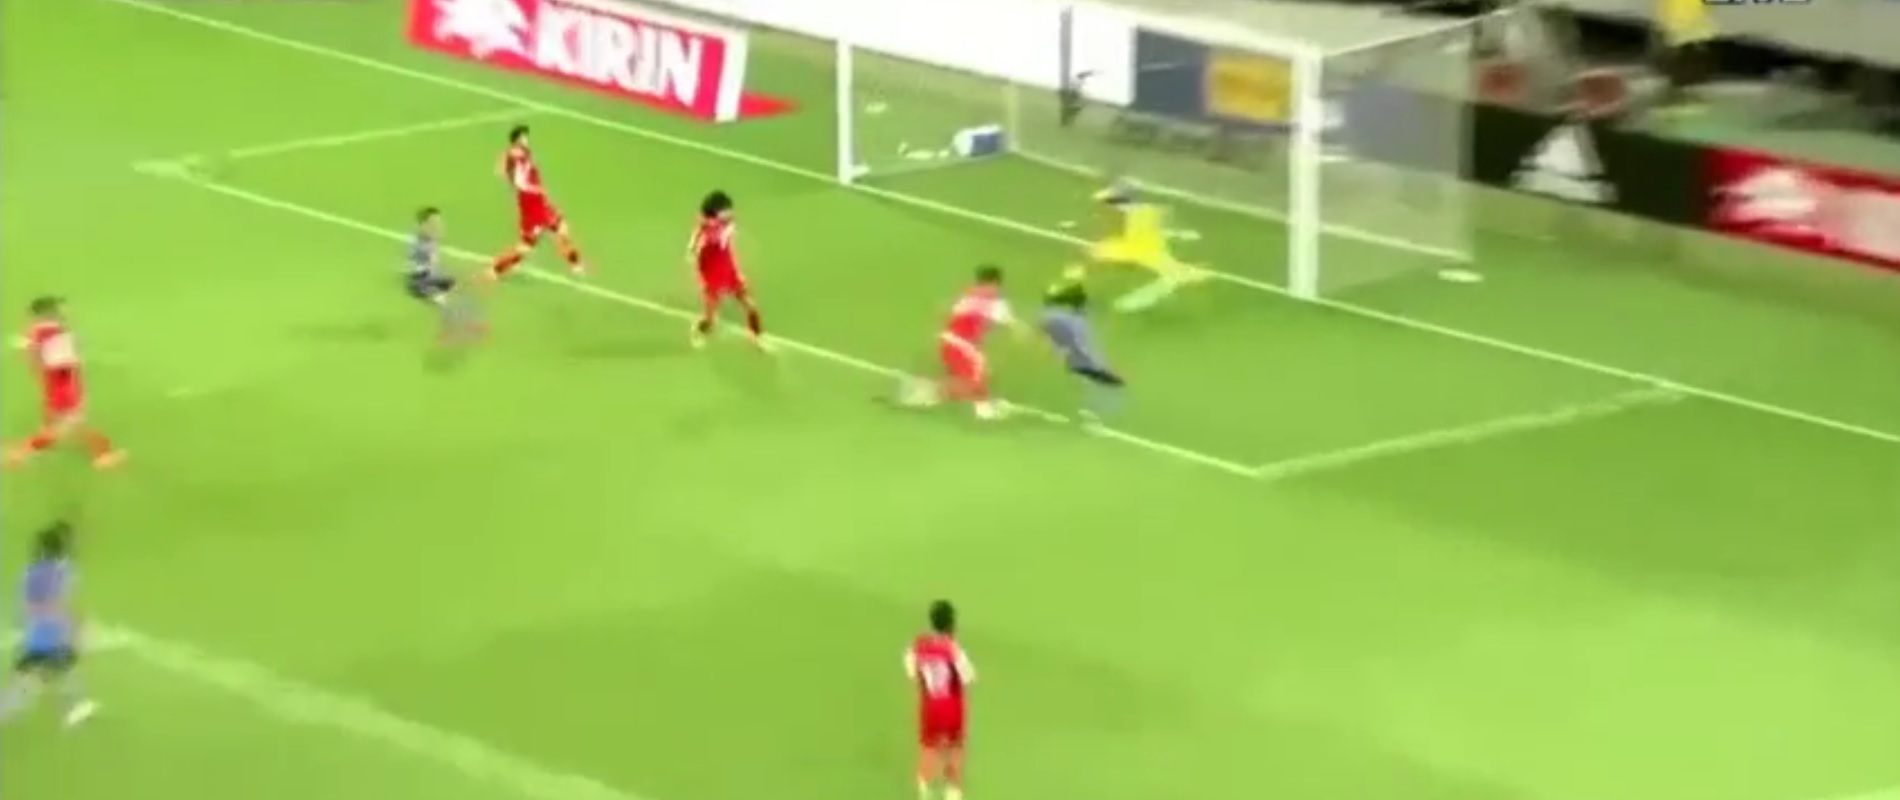 (Video) Minamino bags glorious goal for Japan after great build-up play